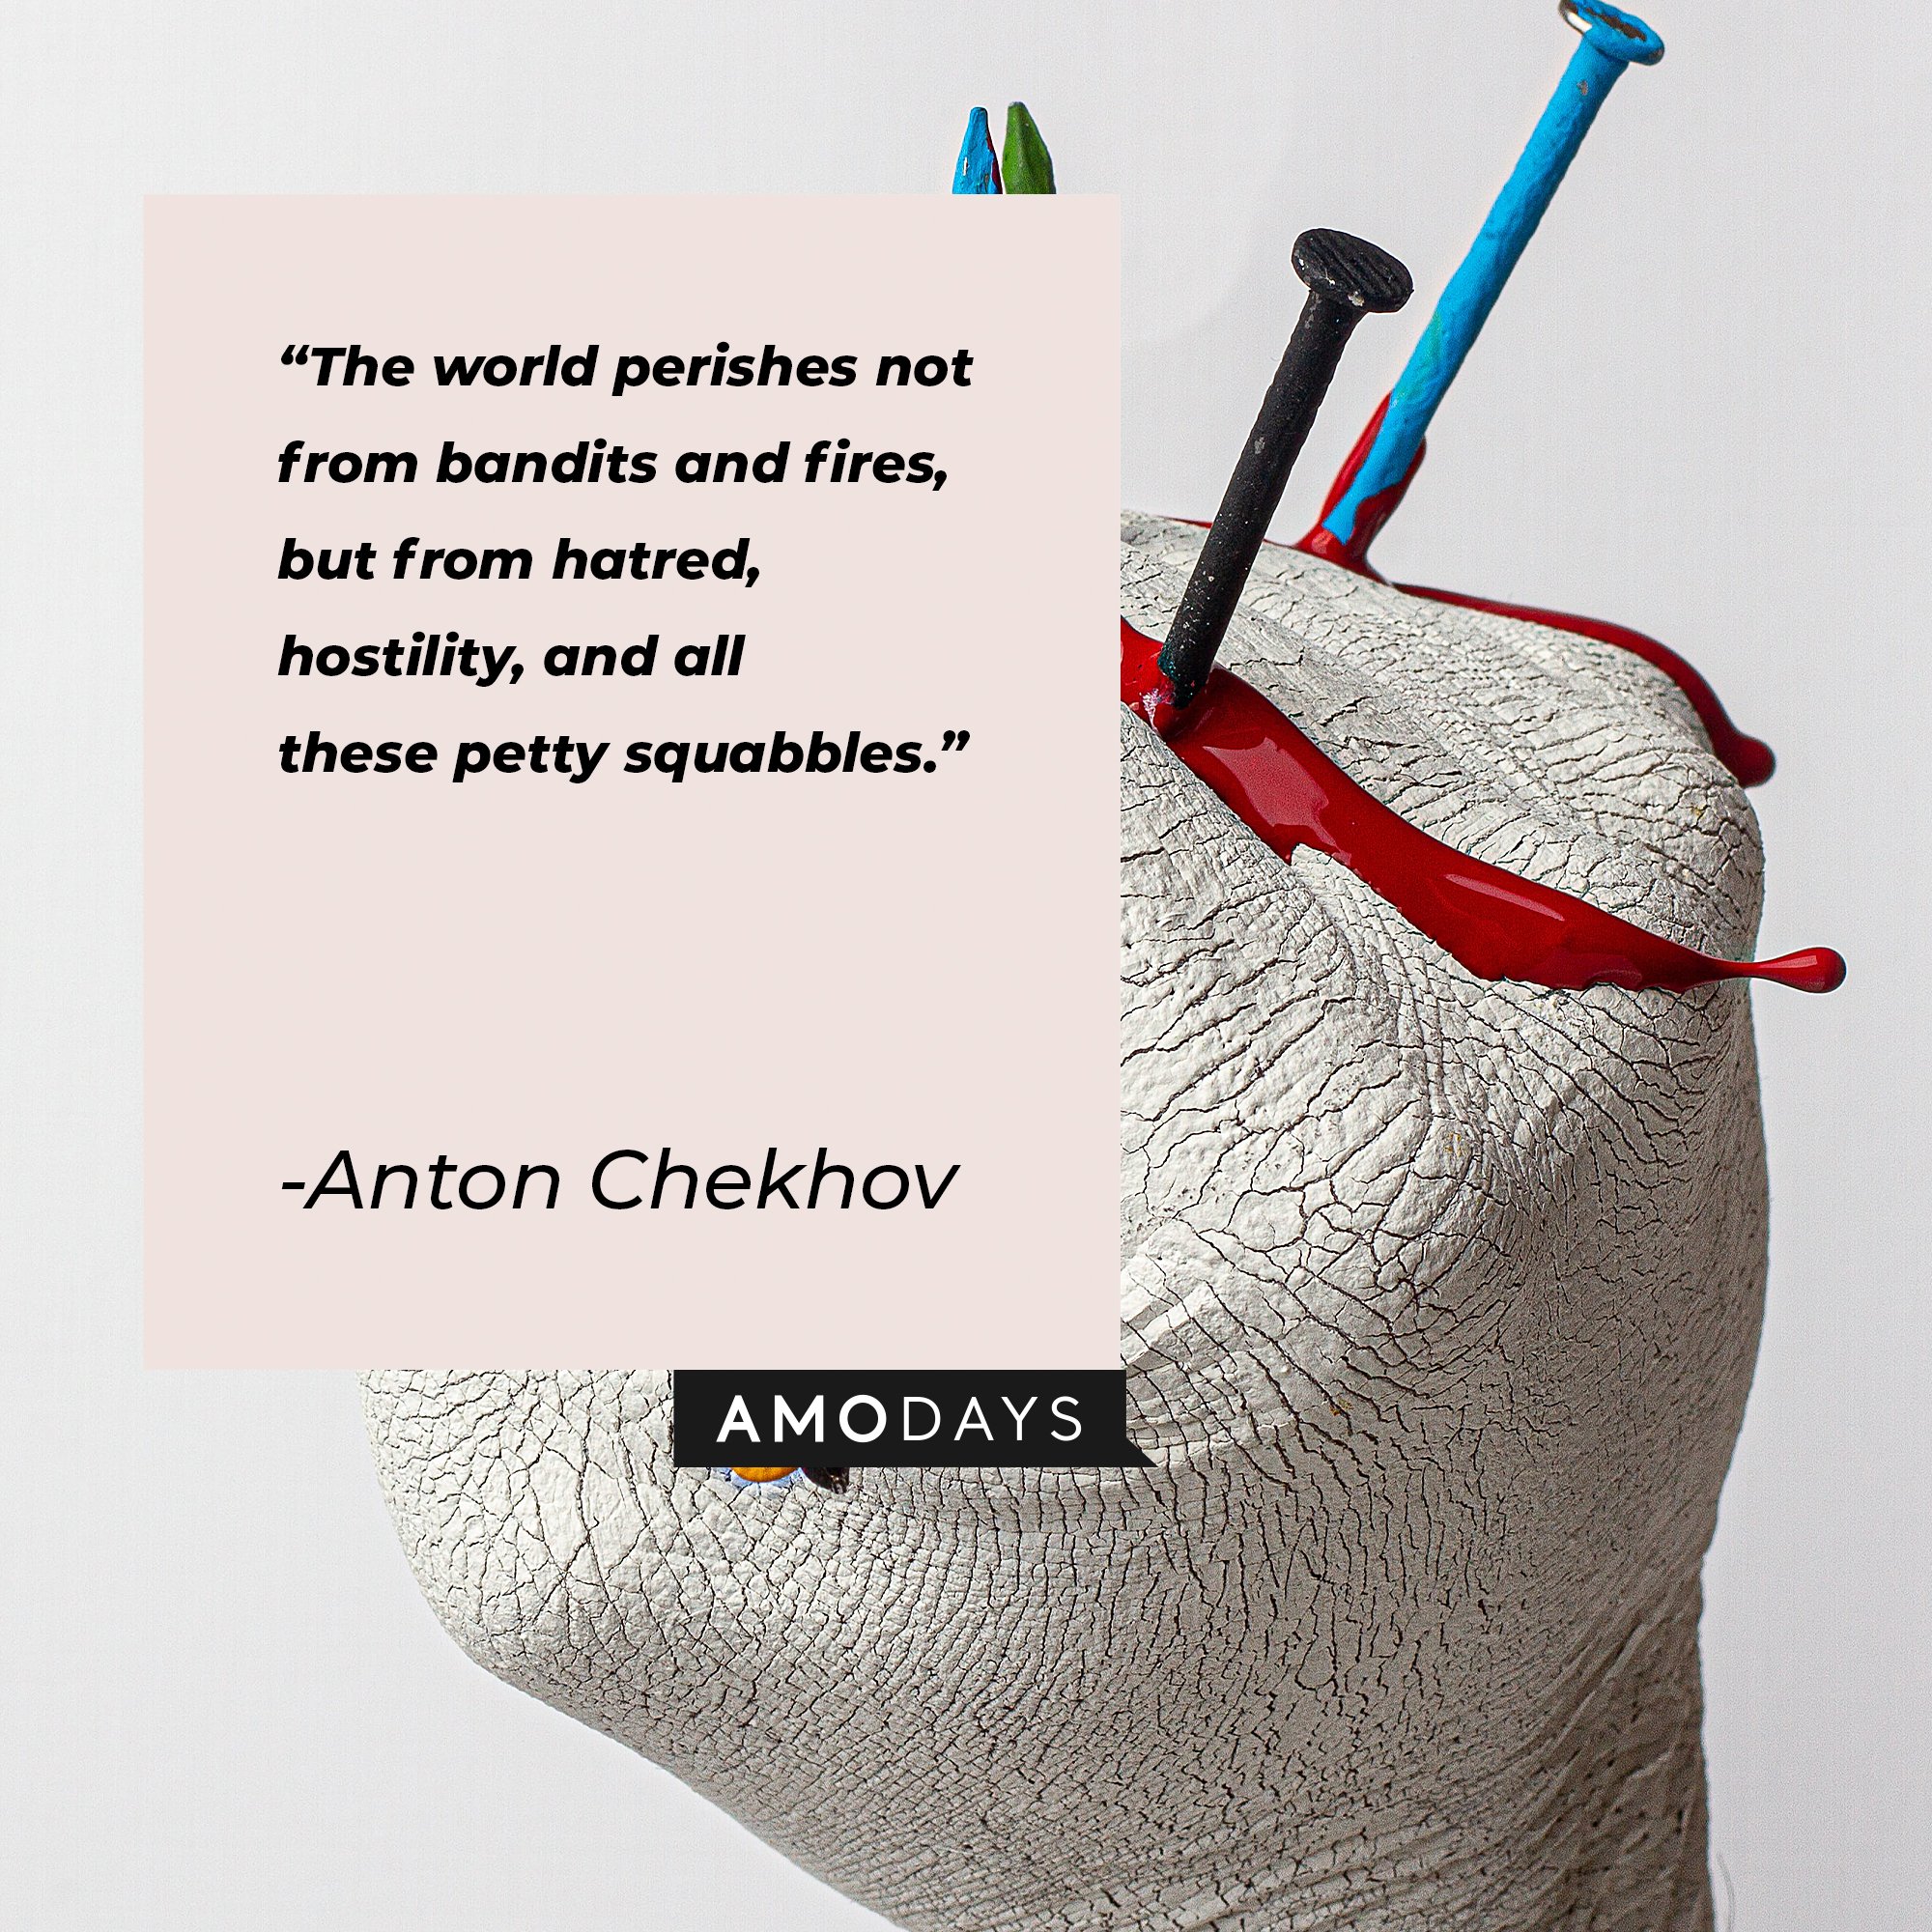 Anton Chekhov's quote: "The world perishes not from bandits and fires, but from hatred, hostility, and all these petty squabbles." | Image: AmoDays